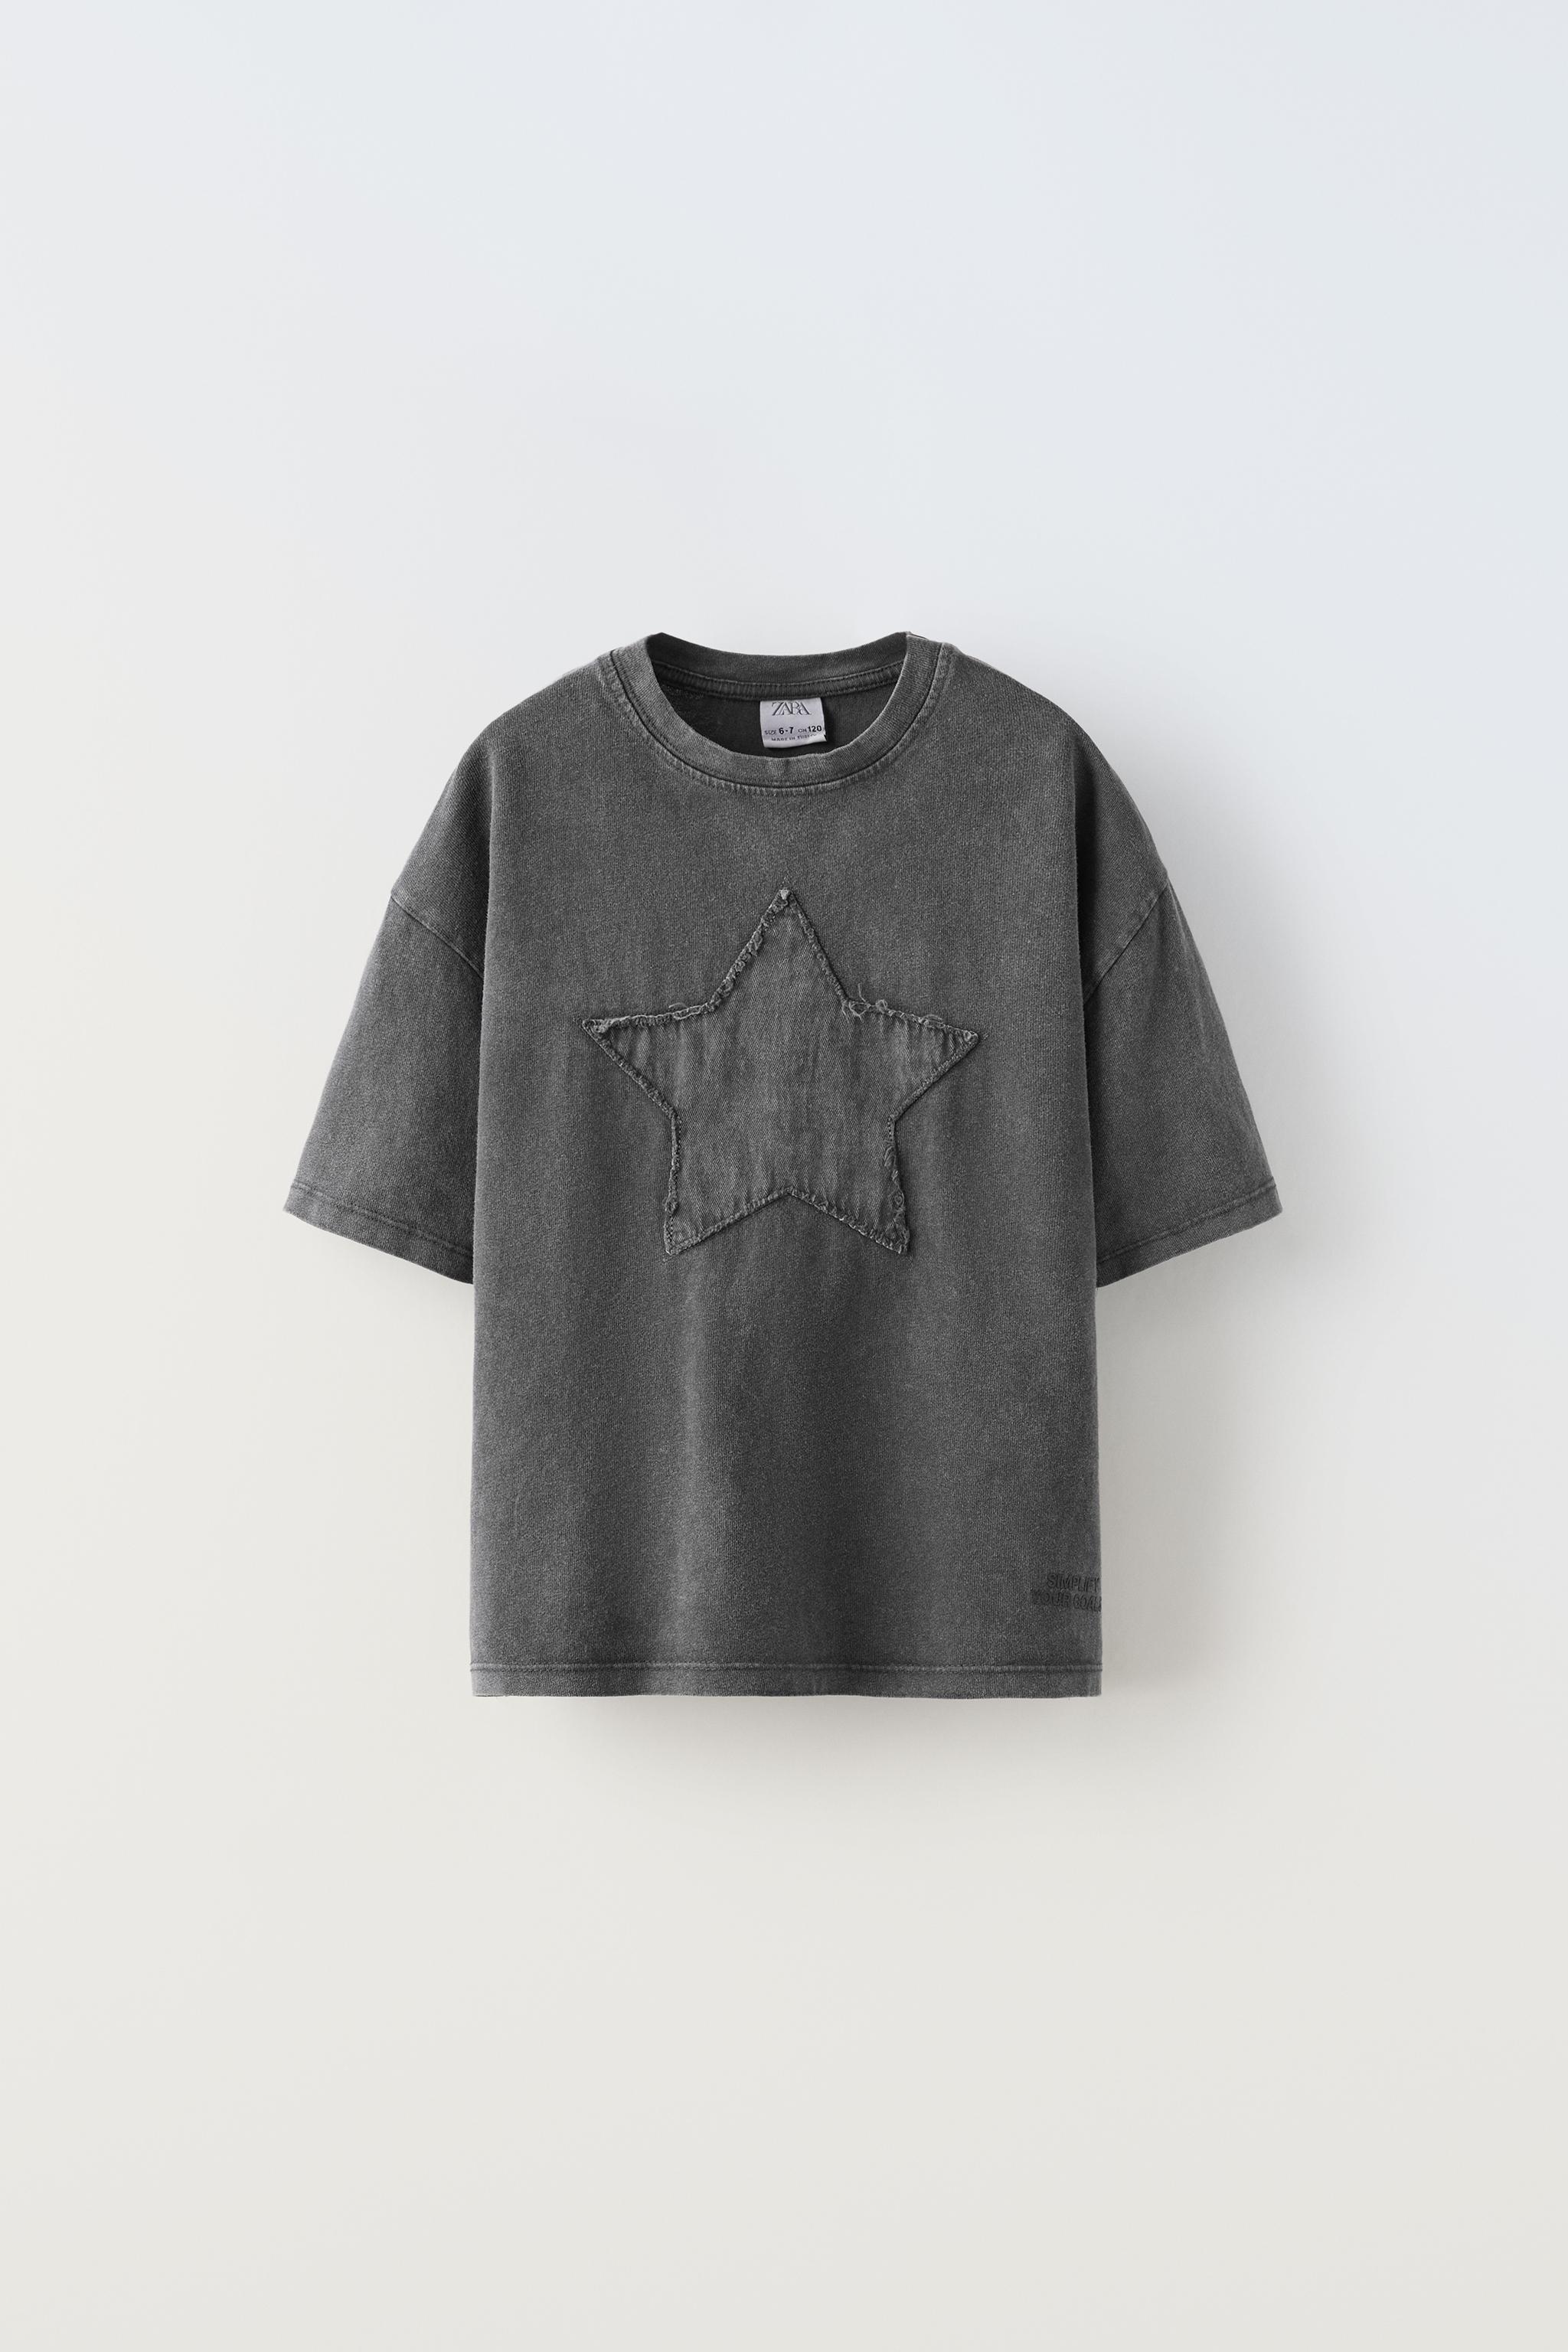 WASHED STAR PATCH T-SHIRT - Anthracite grey | ZARA United States